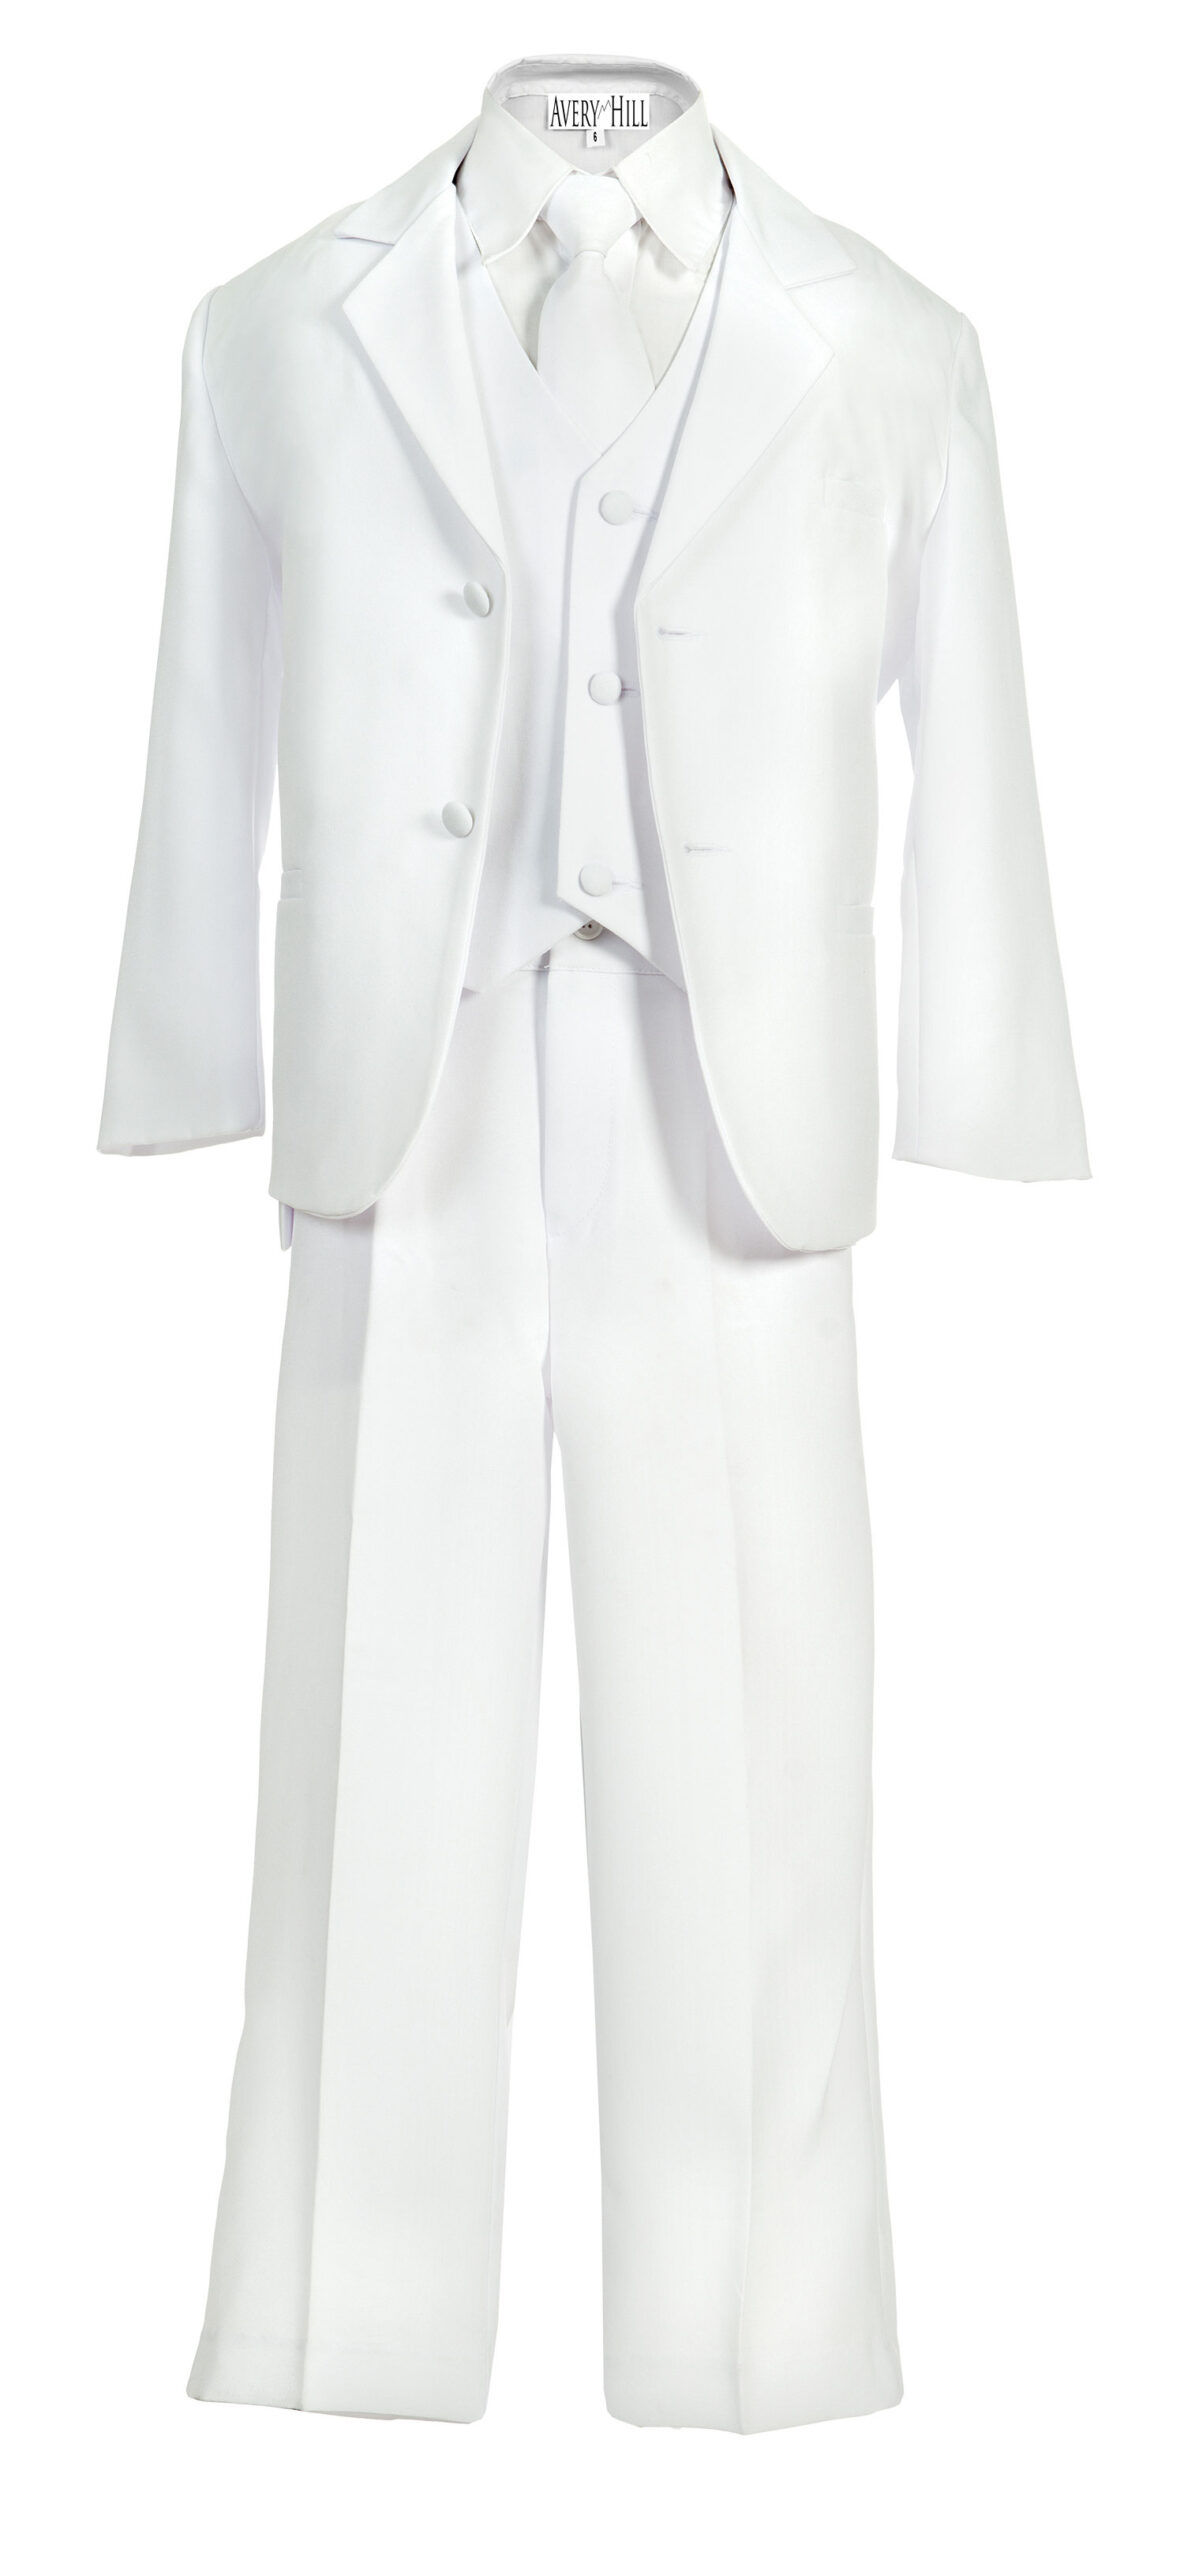 Avery Hill Boys Formal 5 Piece Suit with Shirt and Vest White - 10